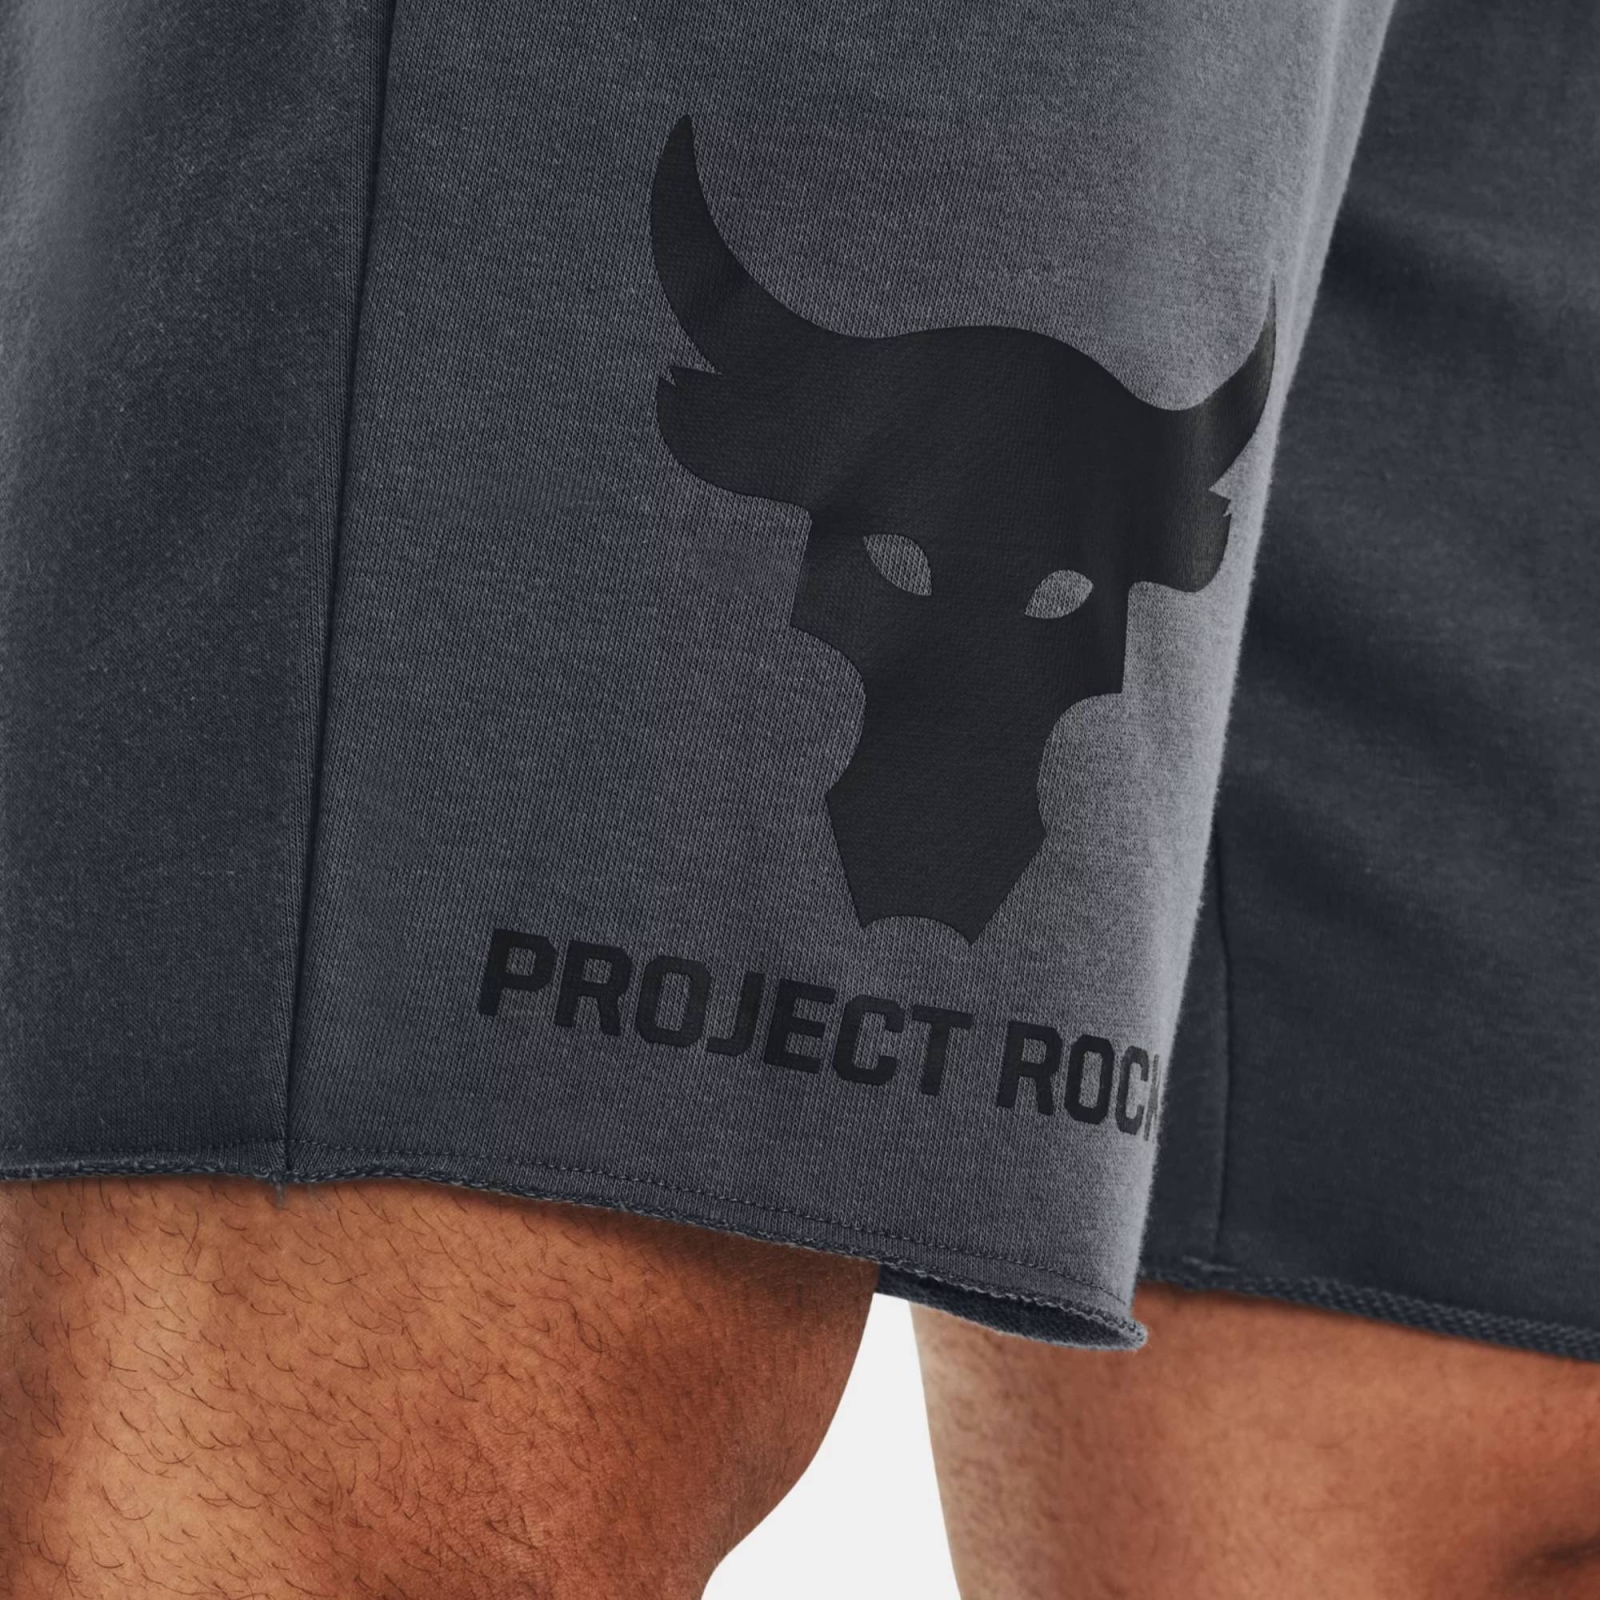 UNDER ARMOUR MENS PROJECT ROCK TERRY SHORTS